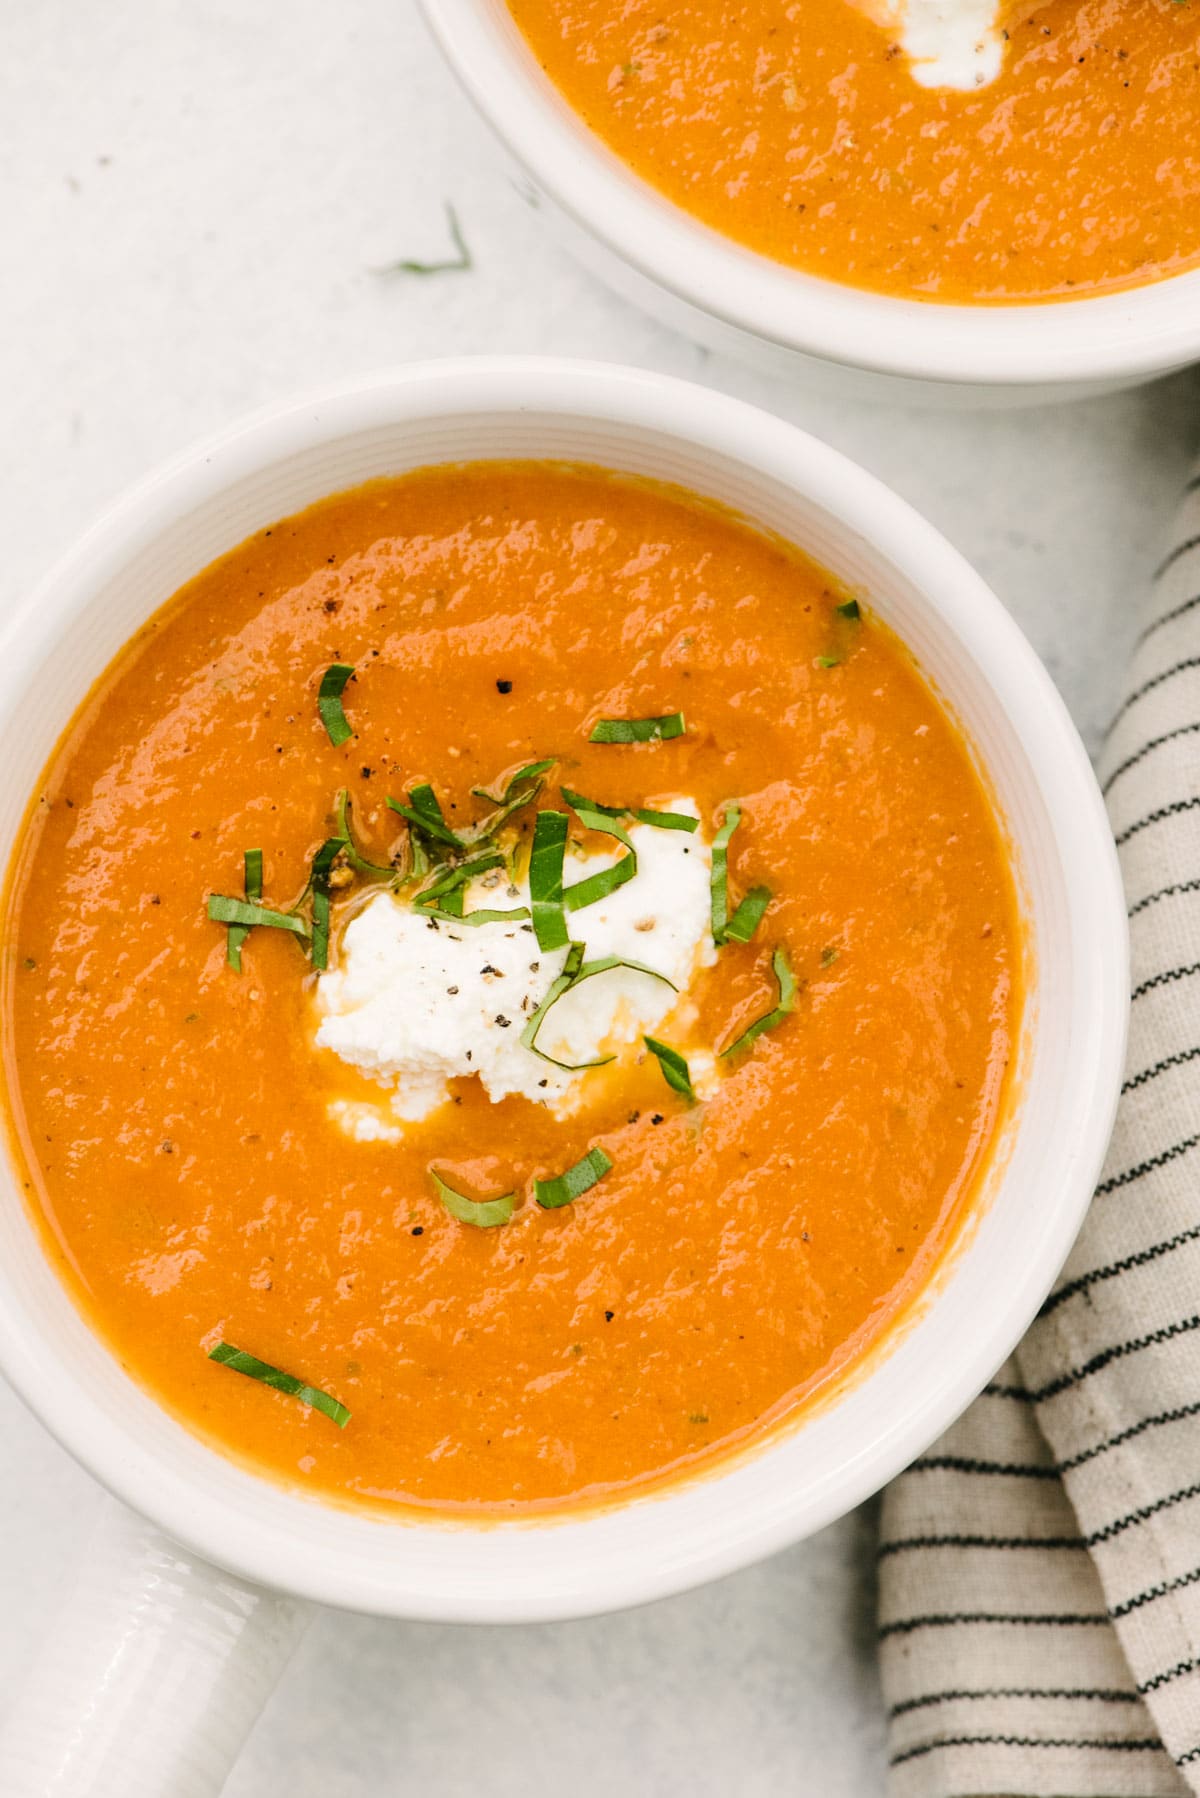 A bowl of creamy tomato basil soup made from fresh tomatoes, garnished with ricotta cheese and fresh basil.